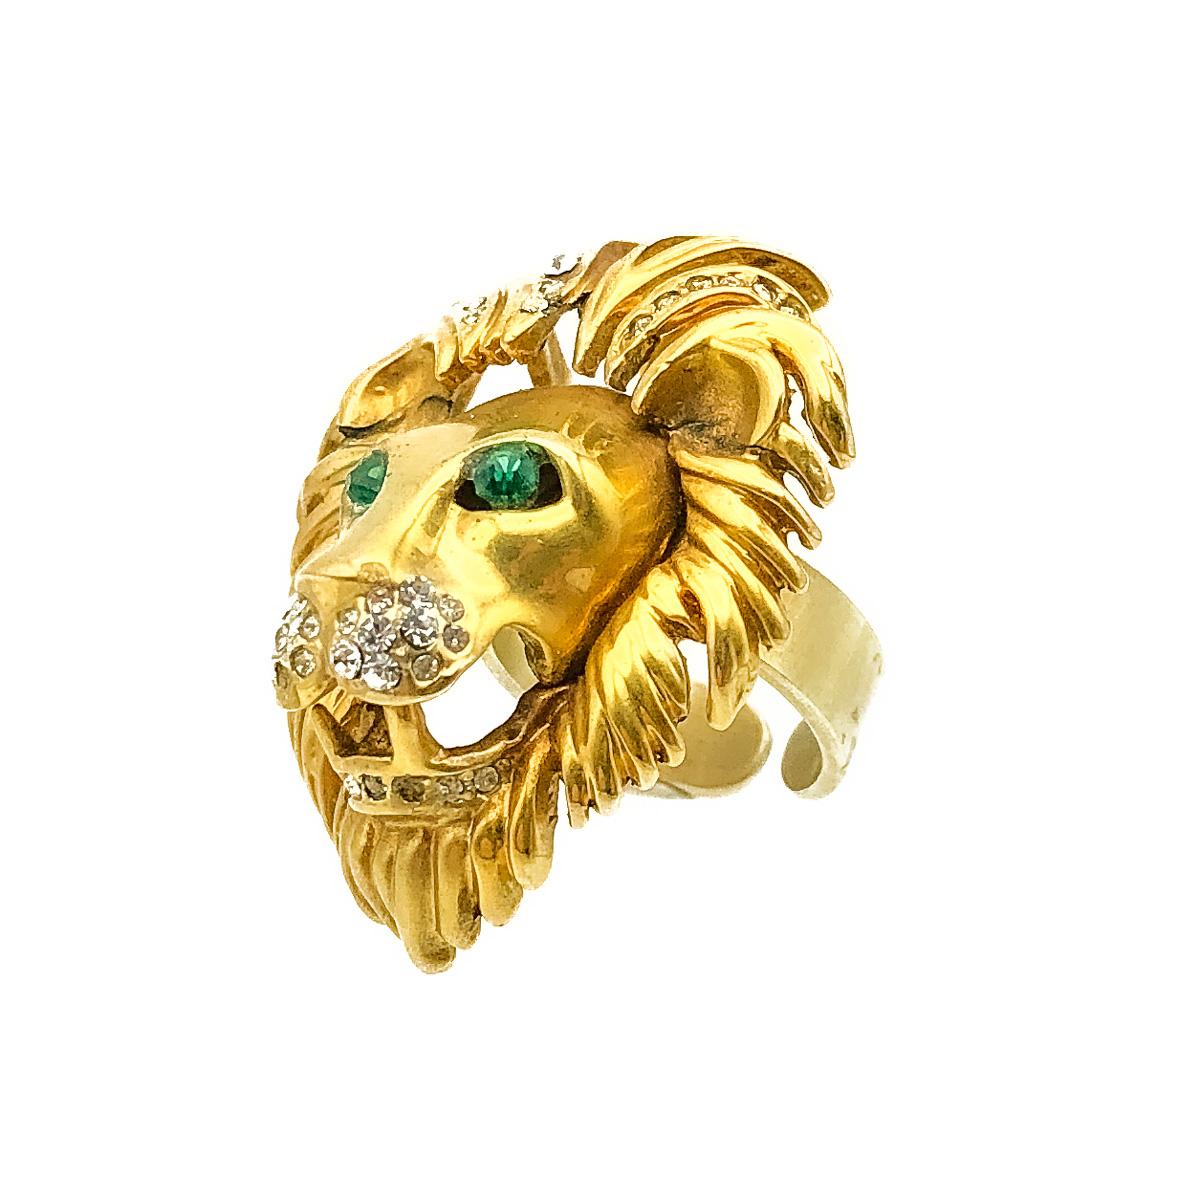 An arresting Vintage Lion Ring dating to the 1980s. Featuring the roaring face of a male lion; his wild mane fantastically rendered in the halo of gold with crystal chatons. His emerald crystal eyes artfully set and the gaping maw embellished by a